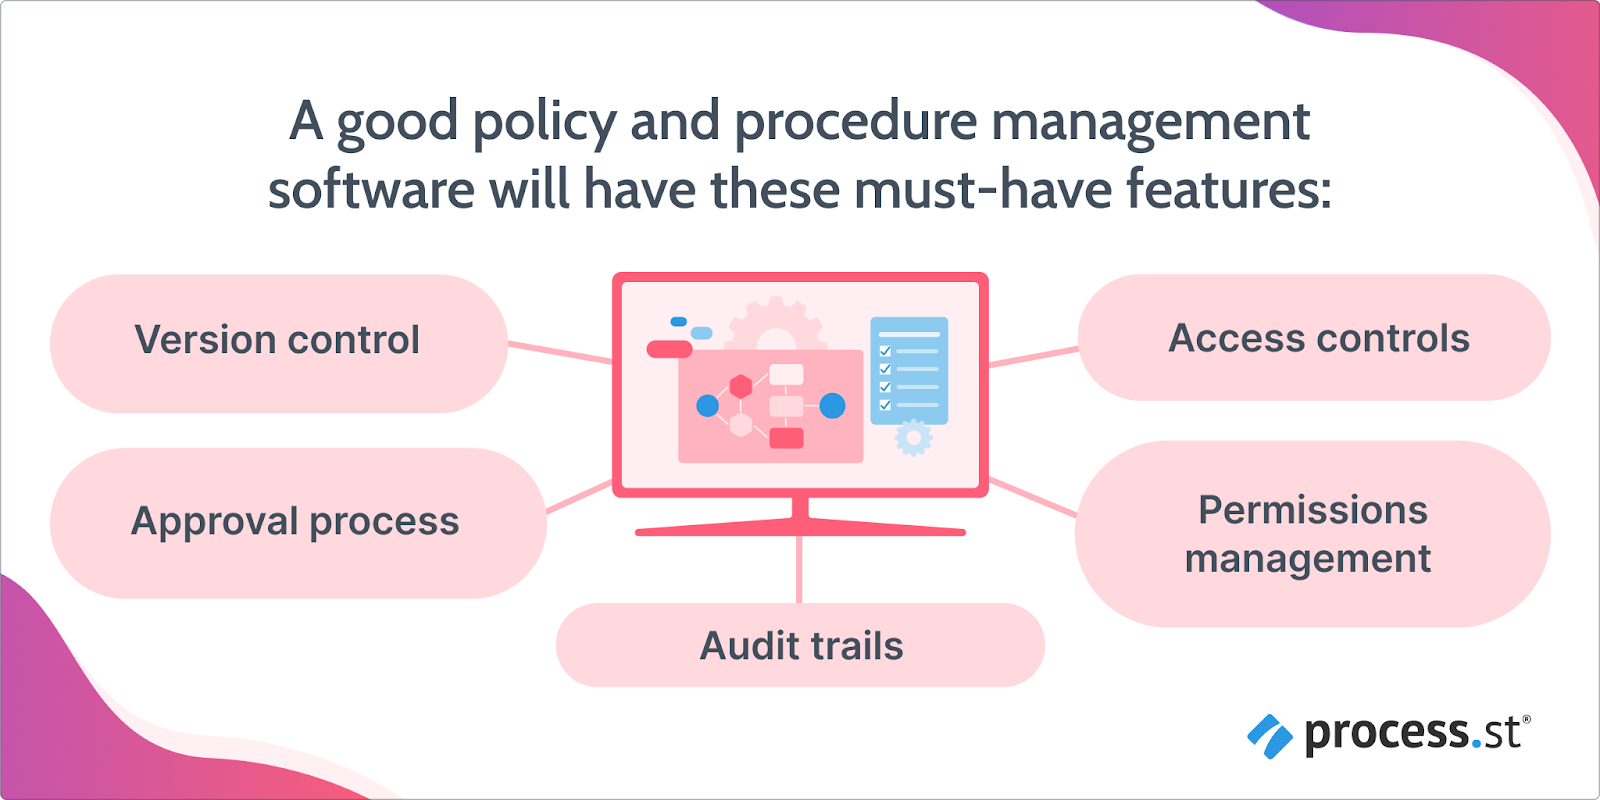 image showing the key features of policy and procedure management software